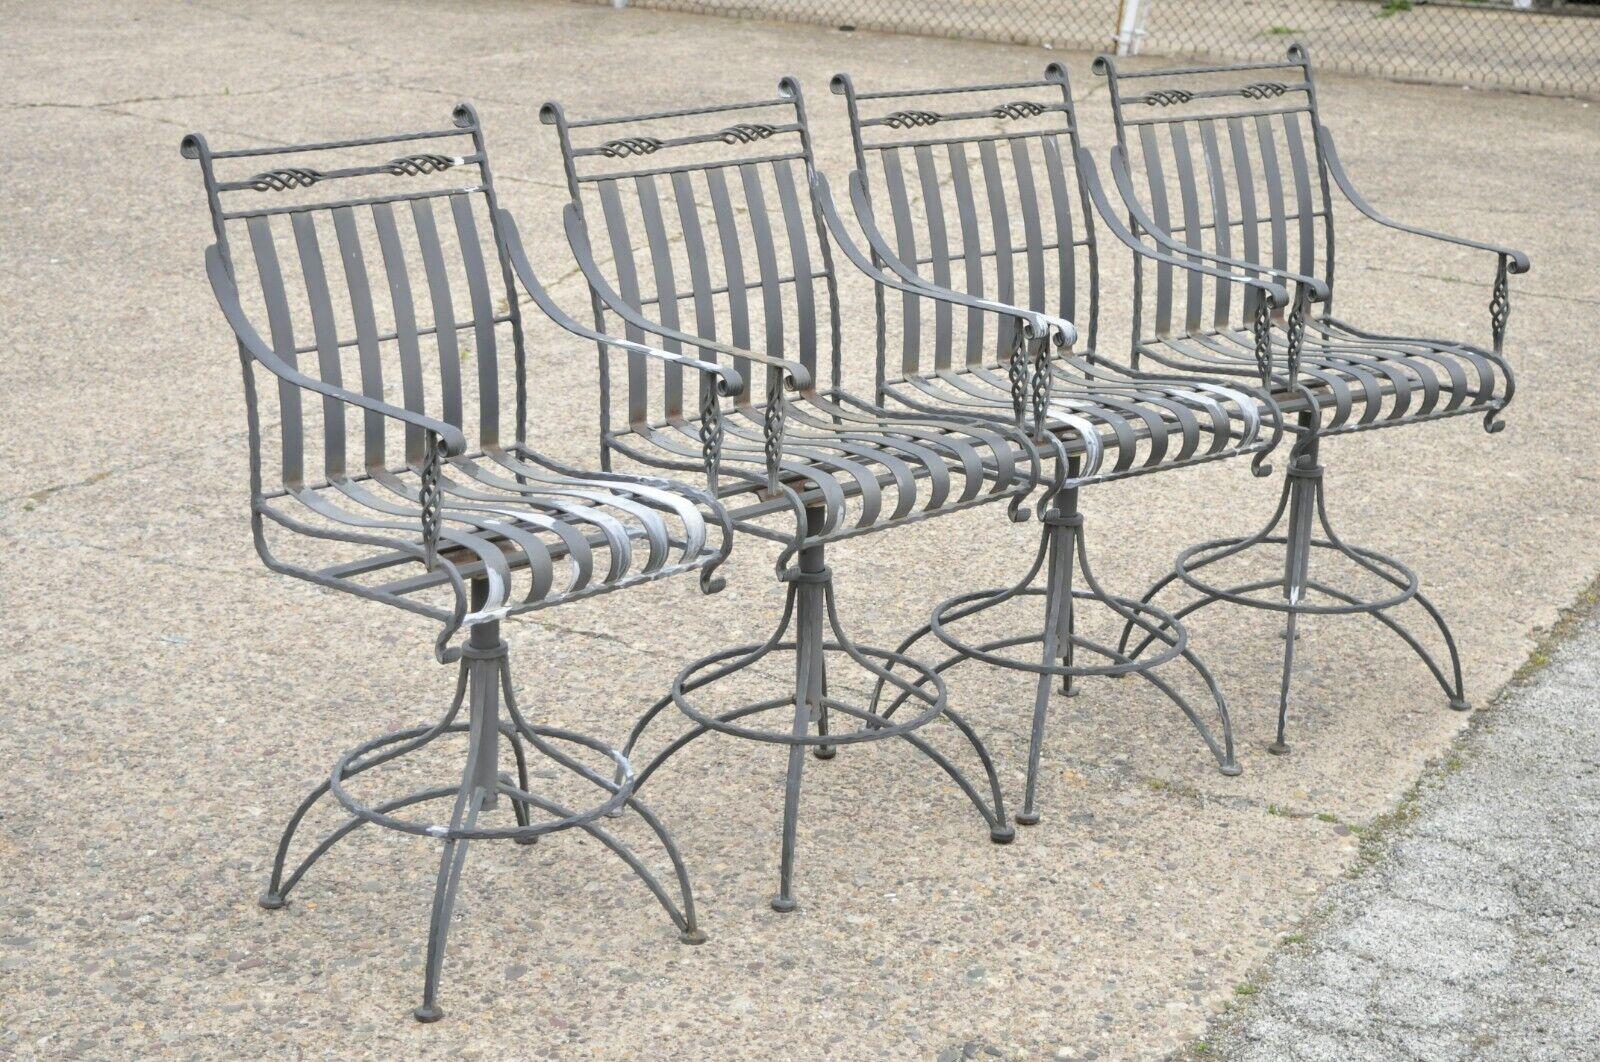 Italian style heavy scrolling wrought iron outdoor garden barstools - Set of 4. Item features (4) barstools, heavy wrought iron and steel construction, swivel seat, twisted frame, quality craftsmanship, great style and form. Circa Late 20th Century.